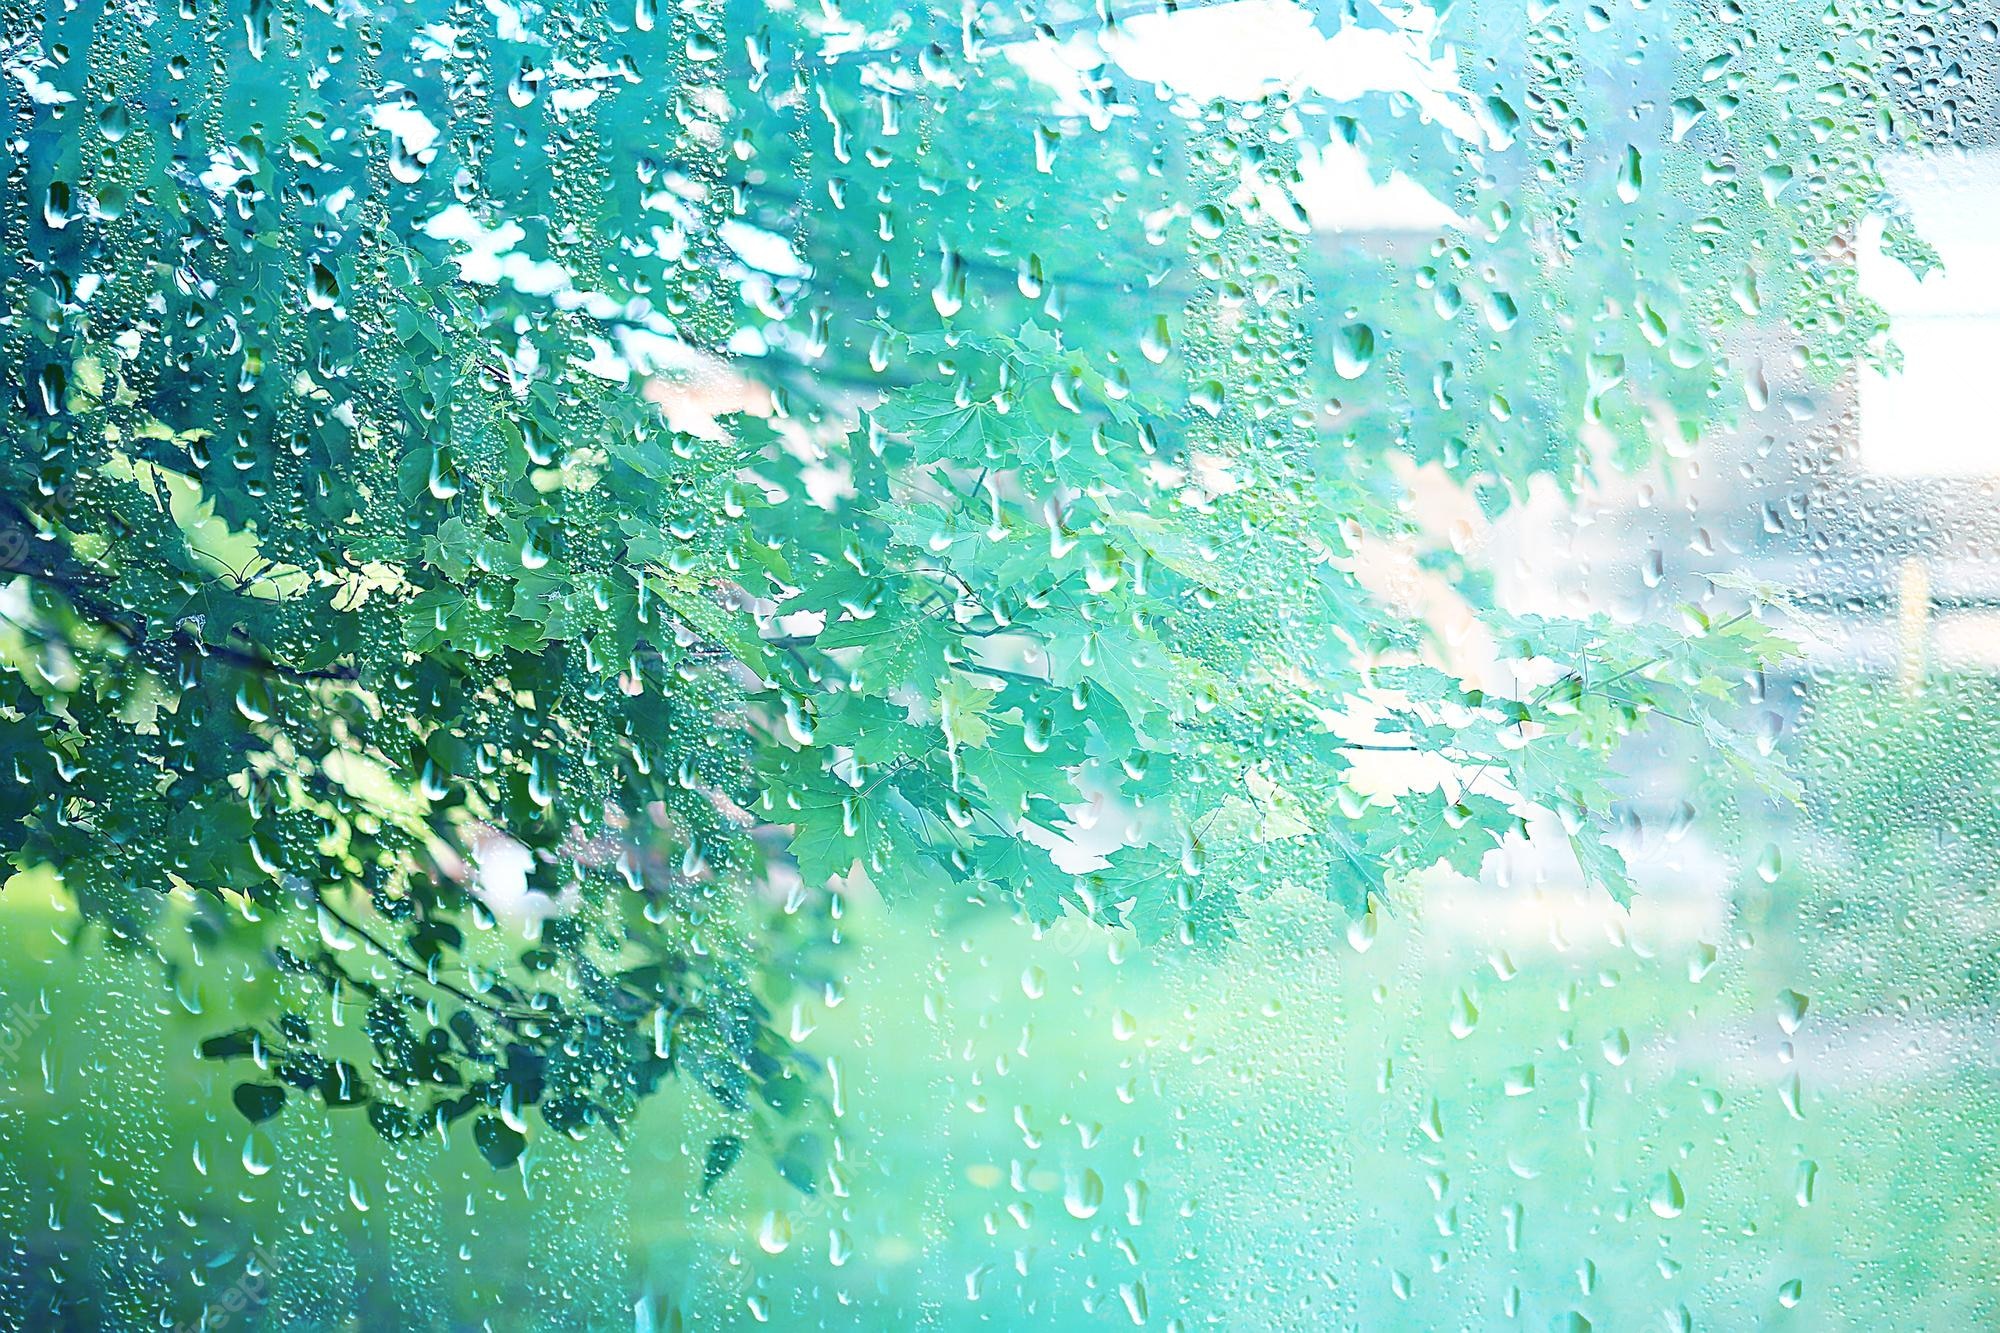 Premium Photo. Summer rain wet glass / abstract background landscape on a rainy day outside the window blurred background